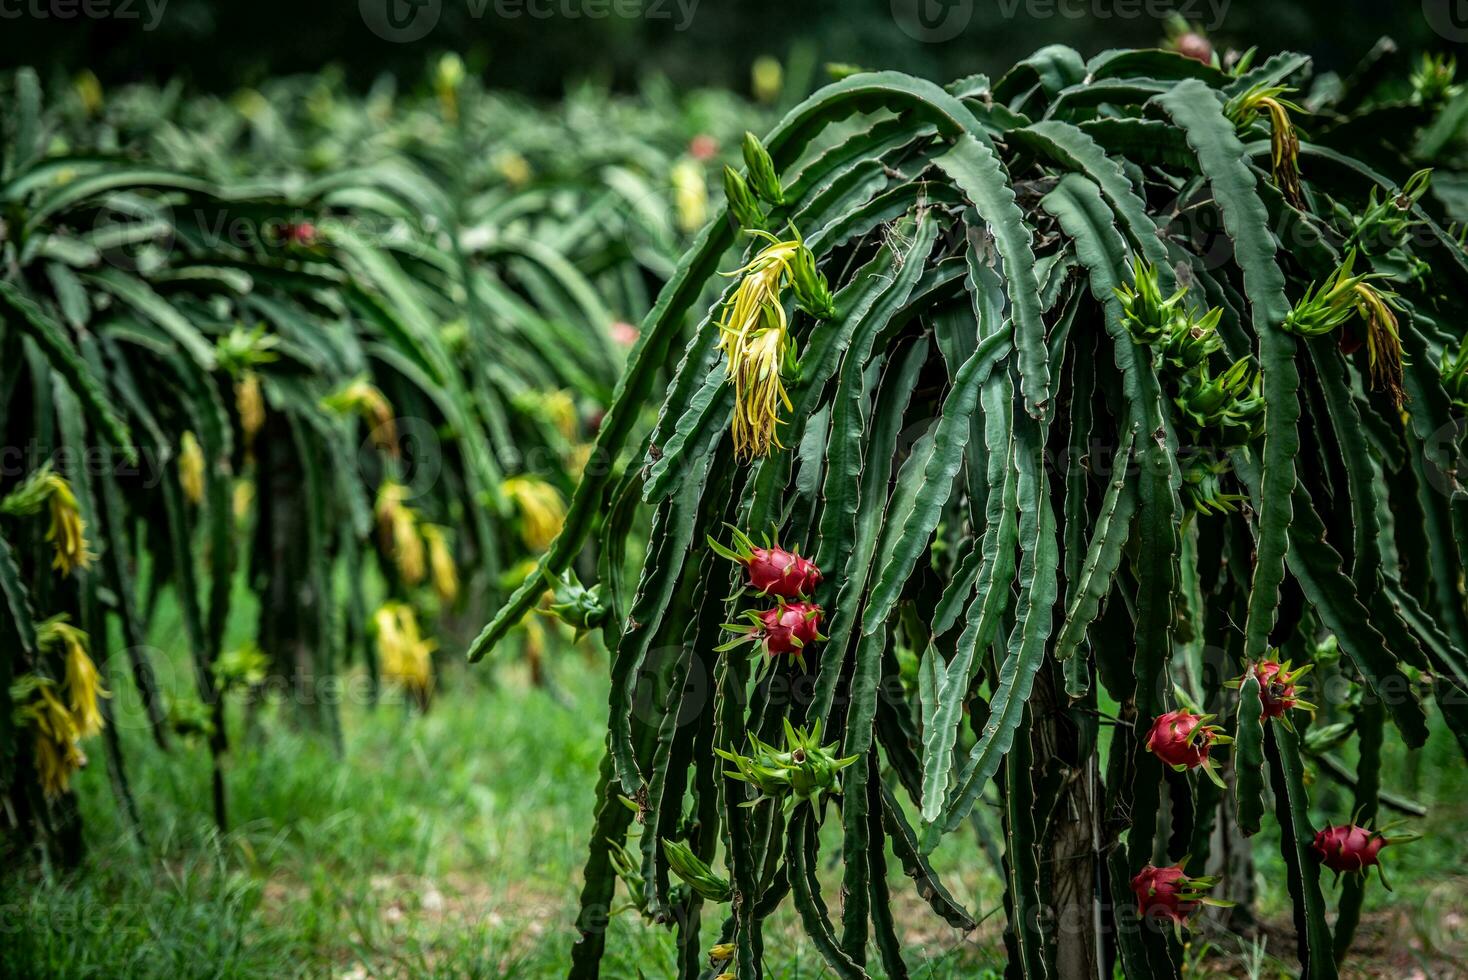 dragon fruit tree waiting for the harvest in the agriculture farm at asian, plantation dragon fruit in thailand fruit orchard outdoor natural. photo